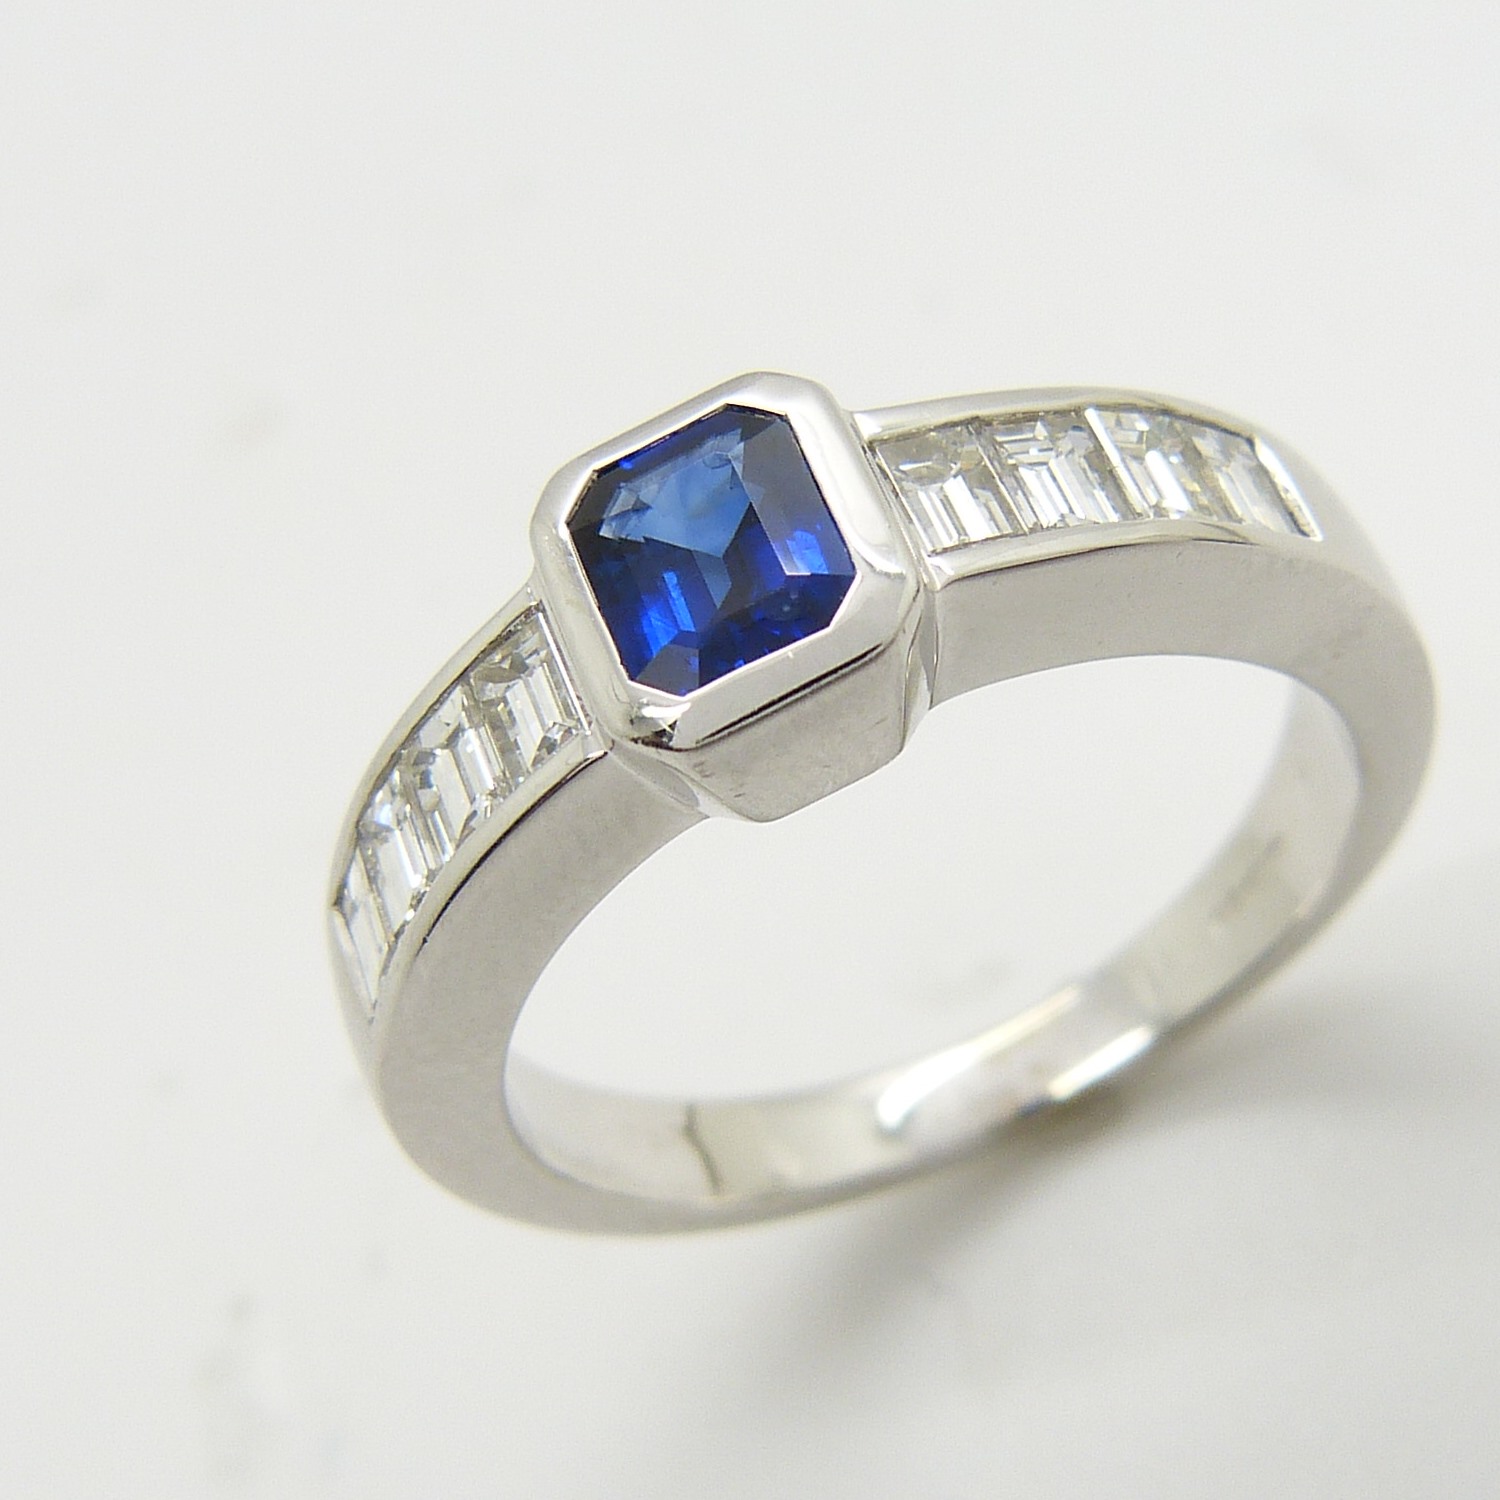 18ct white gold step-cut, sapphire and baguette-cut diamond dress ring - Image 5 of 6